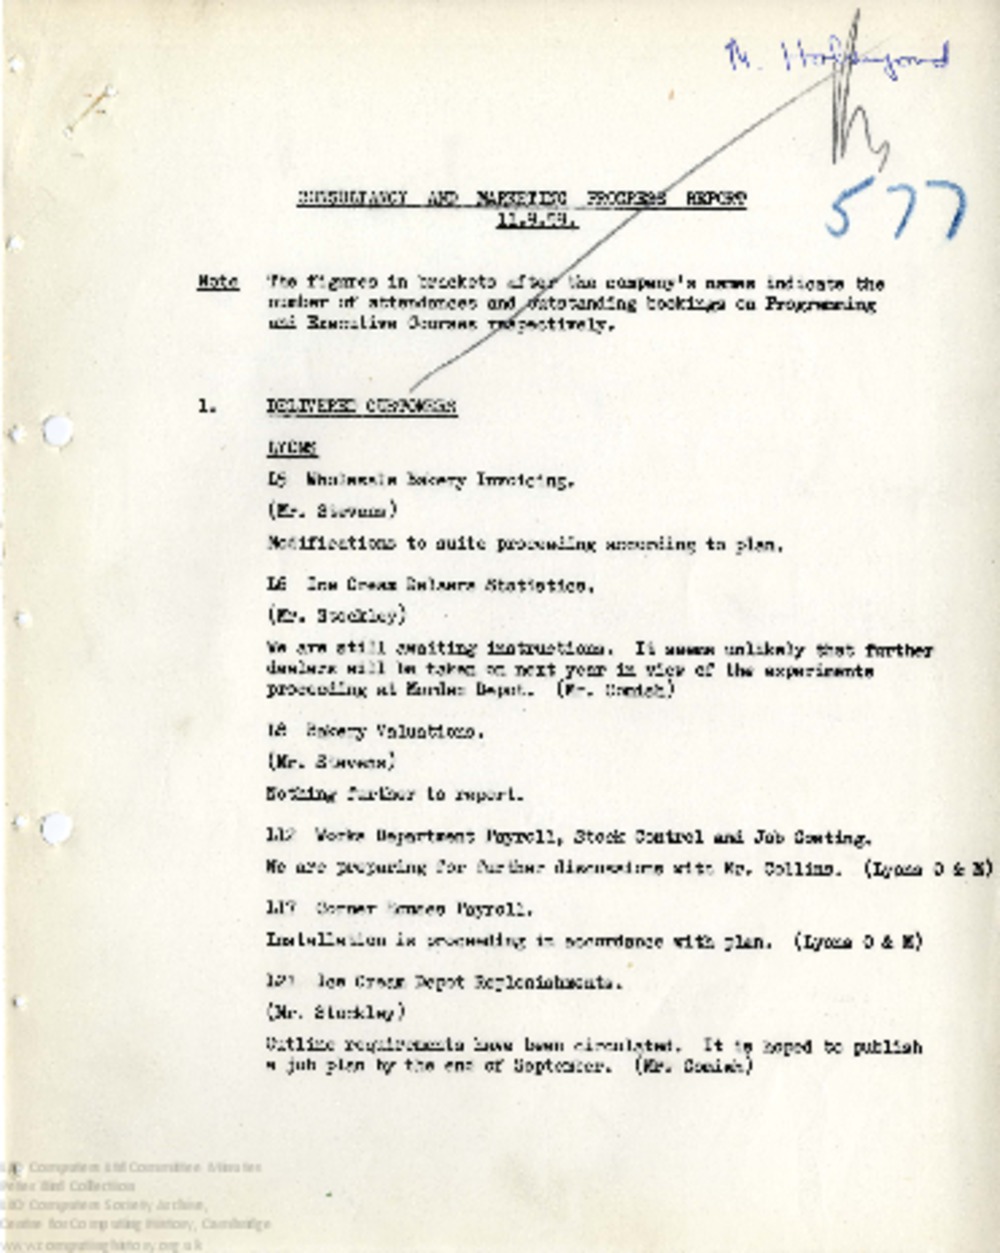 Article: 64481 Consultancy and Marketing Progress Report, 11th Sep 1959